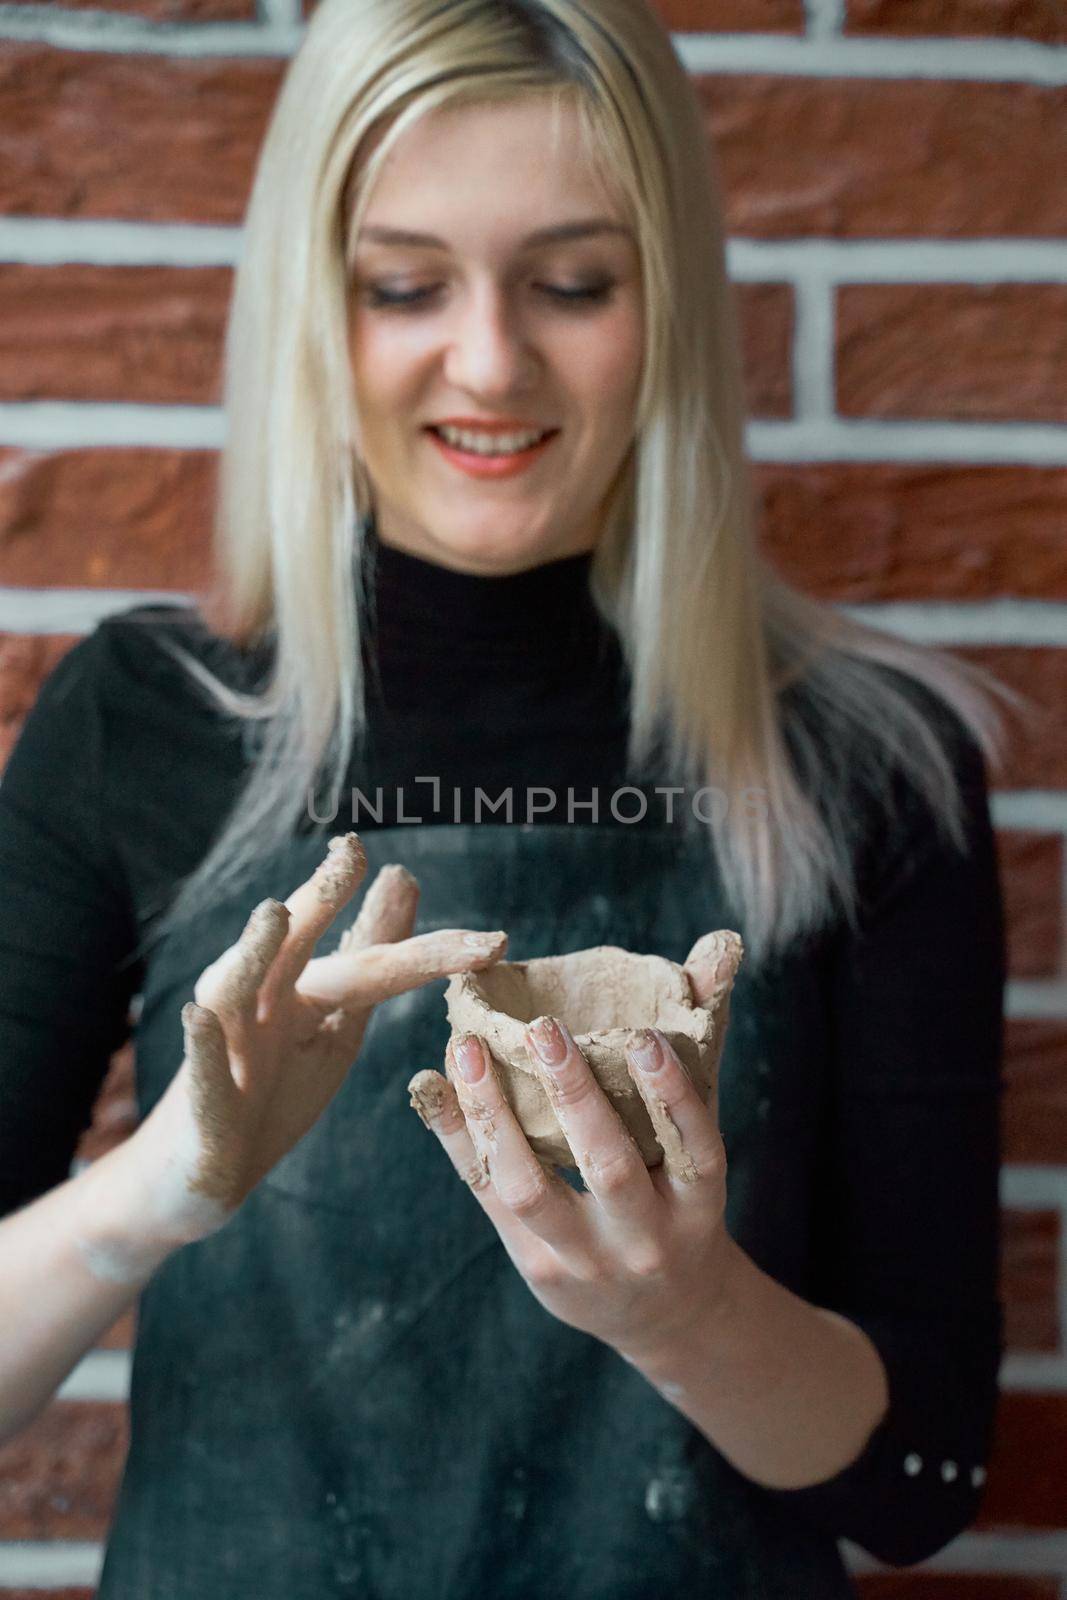 Smiling and happy woman making ceramic bowl in hand. Creative hobby concept. Earn extra money, side hustle, turning hobbies into cash, passion into a job, vertical